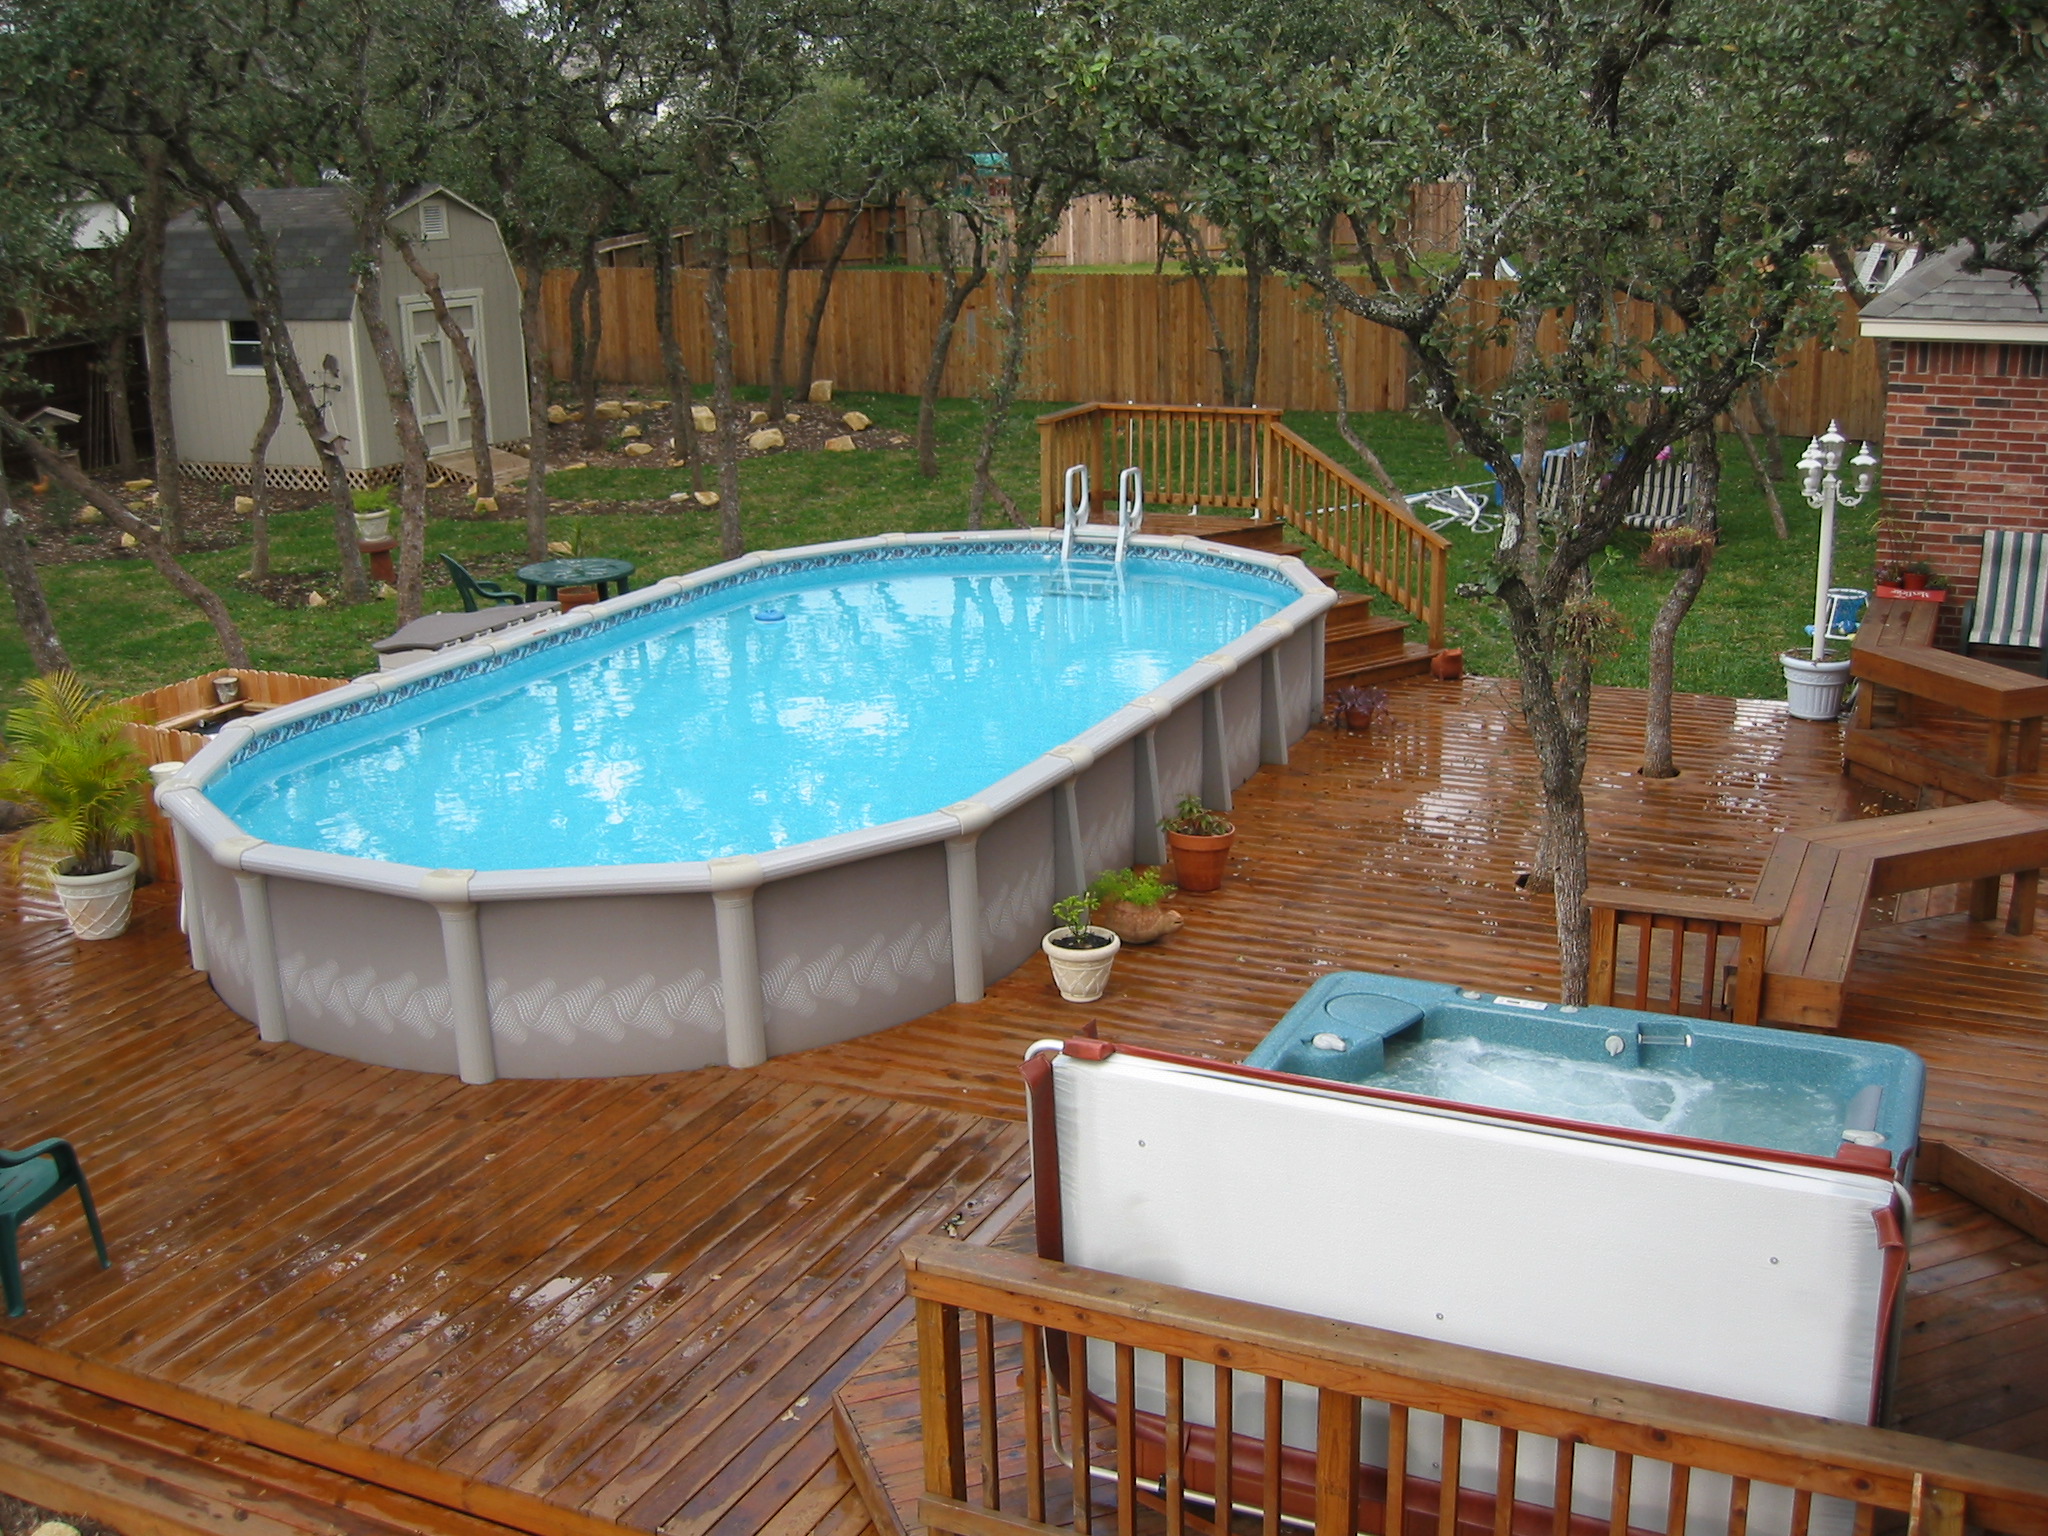   Above Ground Pools   Affordable family fun! 